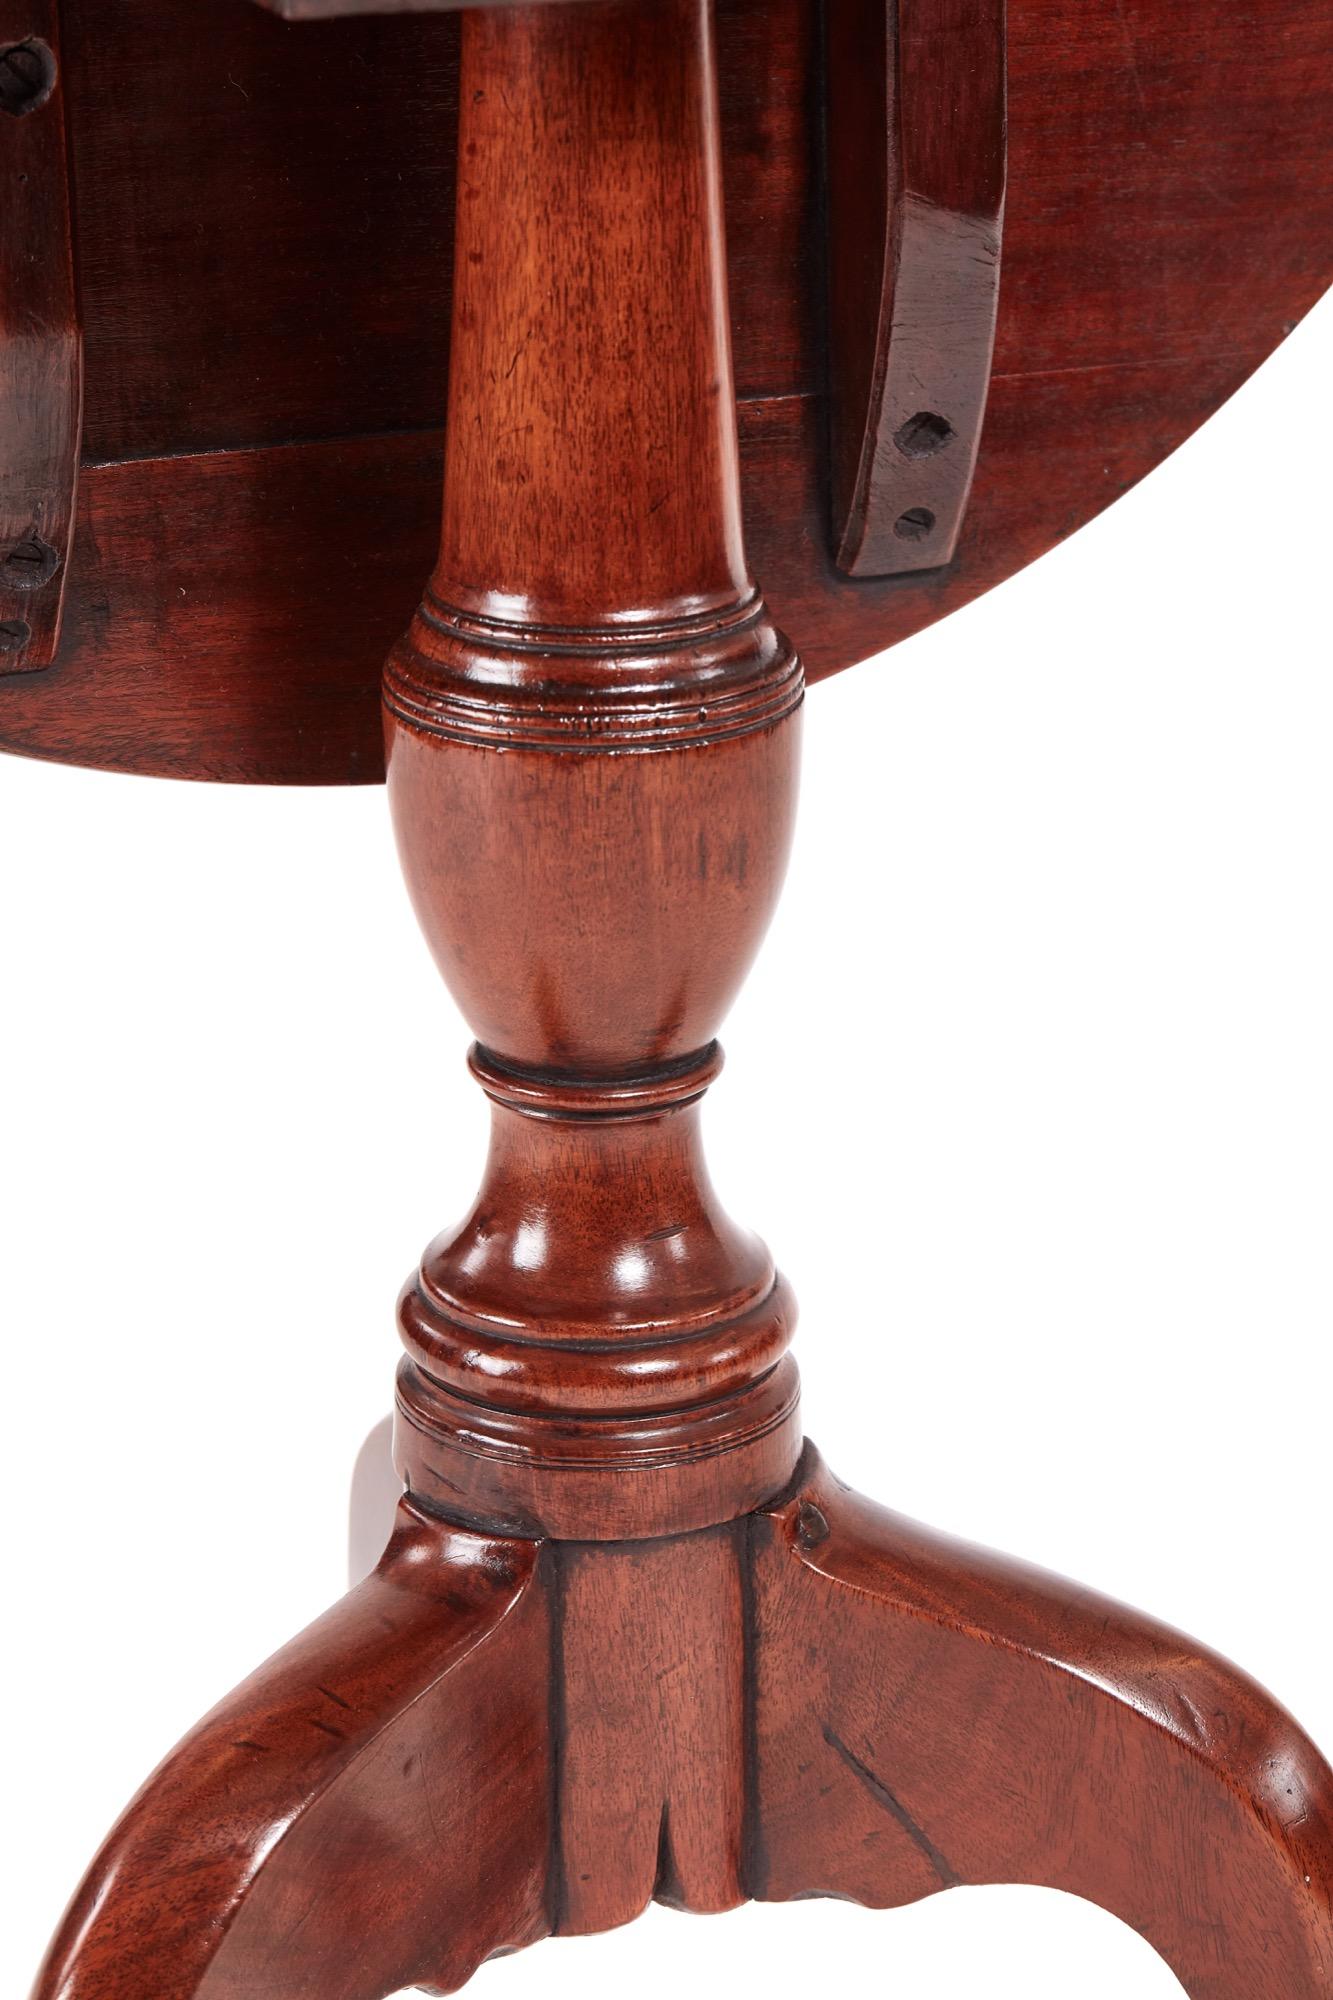 Fine George III antique mahogany tripod table with an attractive solid round mahogany top supported by a turned shaped pedestal raised on three shaped cabriole legs with pad feet.

WORLDWIDE SHIPPING

We are able to ship this item internationally. 